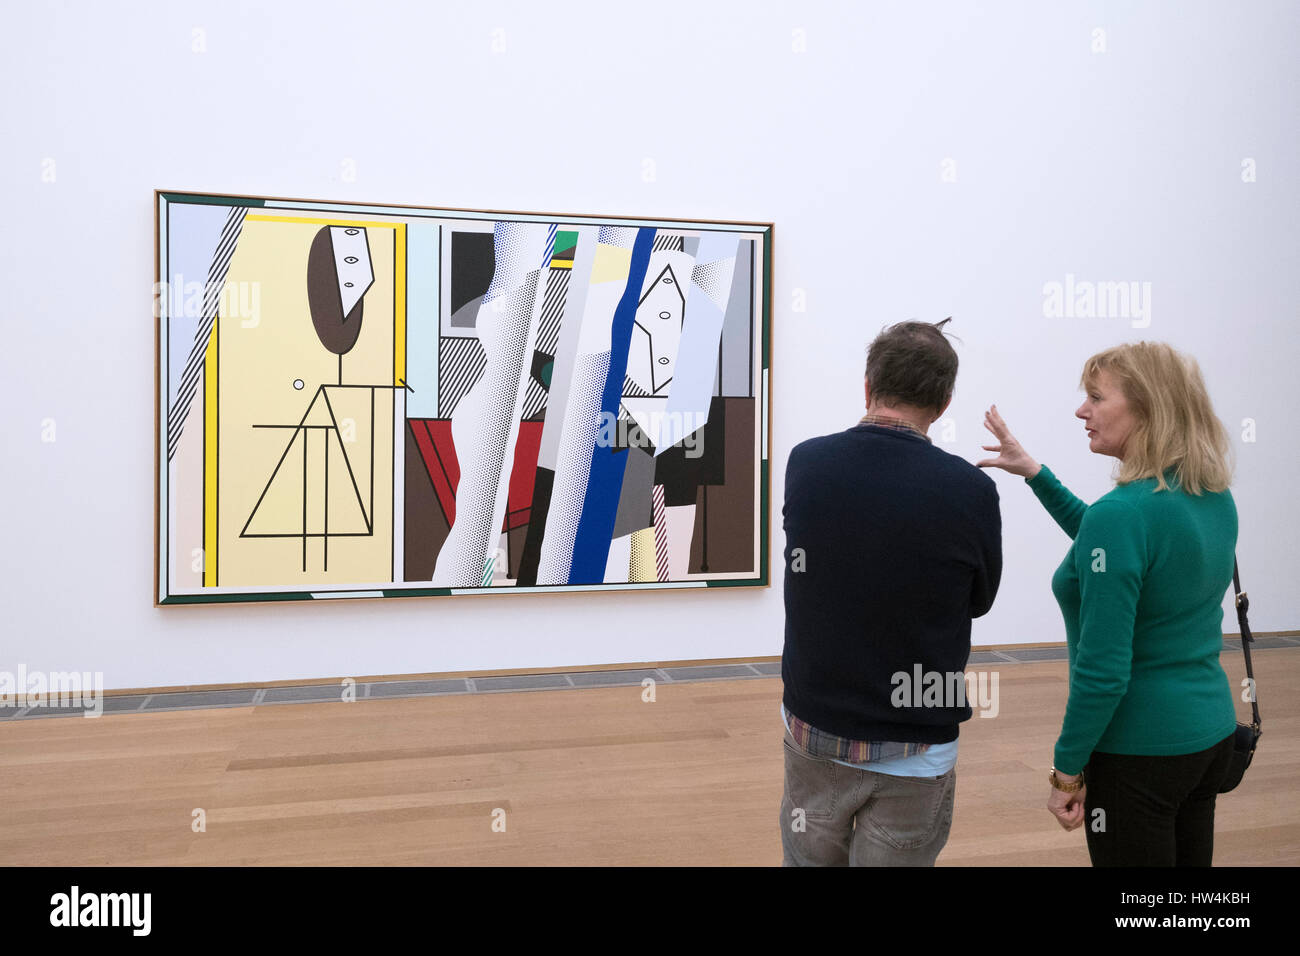 Visitors looking at painting Reflections On 'The Artist's Studio' by Roy Lichtenstein at Hamburger Bahnhof modern art museum in Berlin, Germany Stock Photo